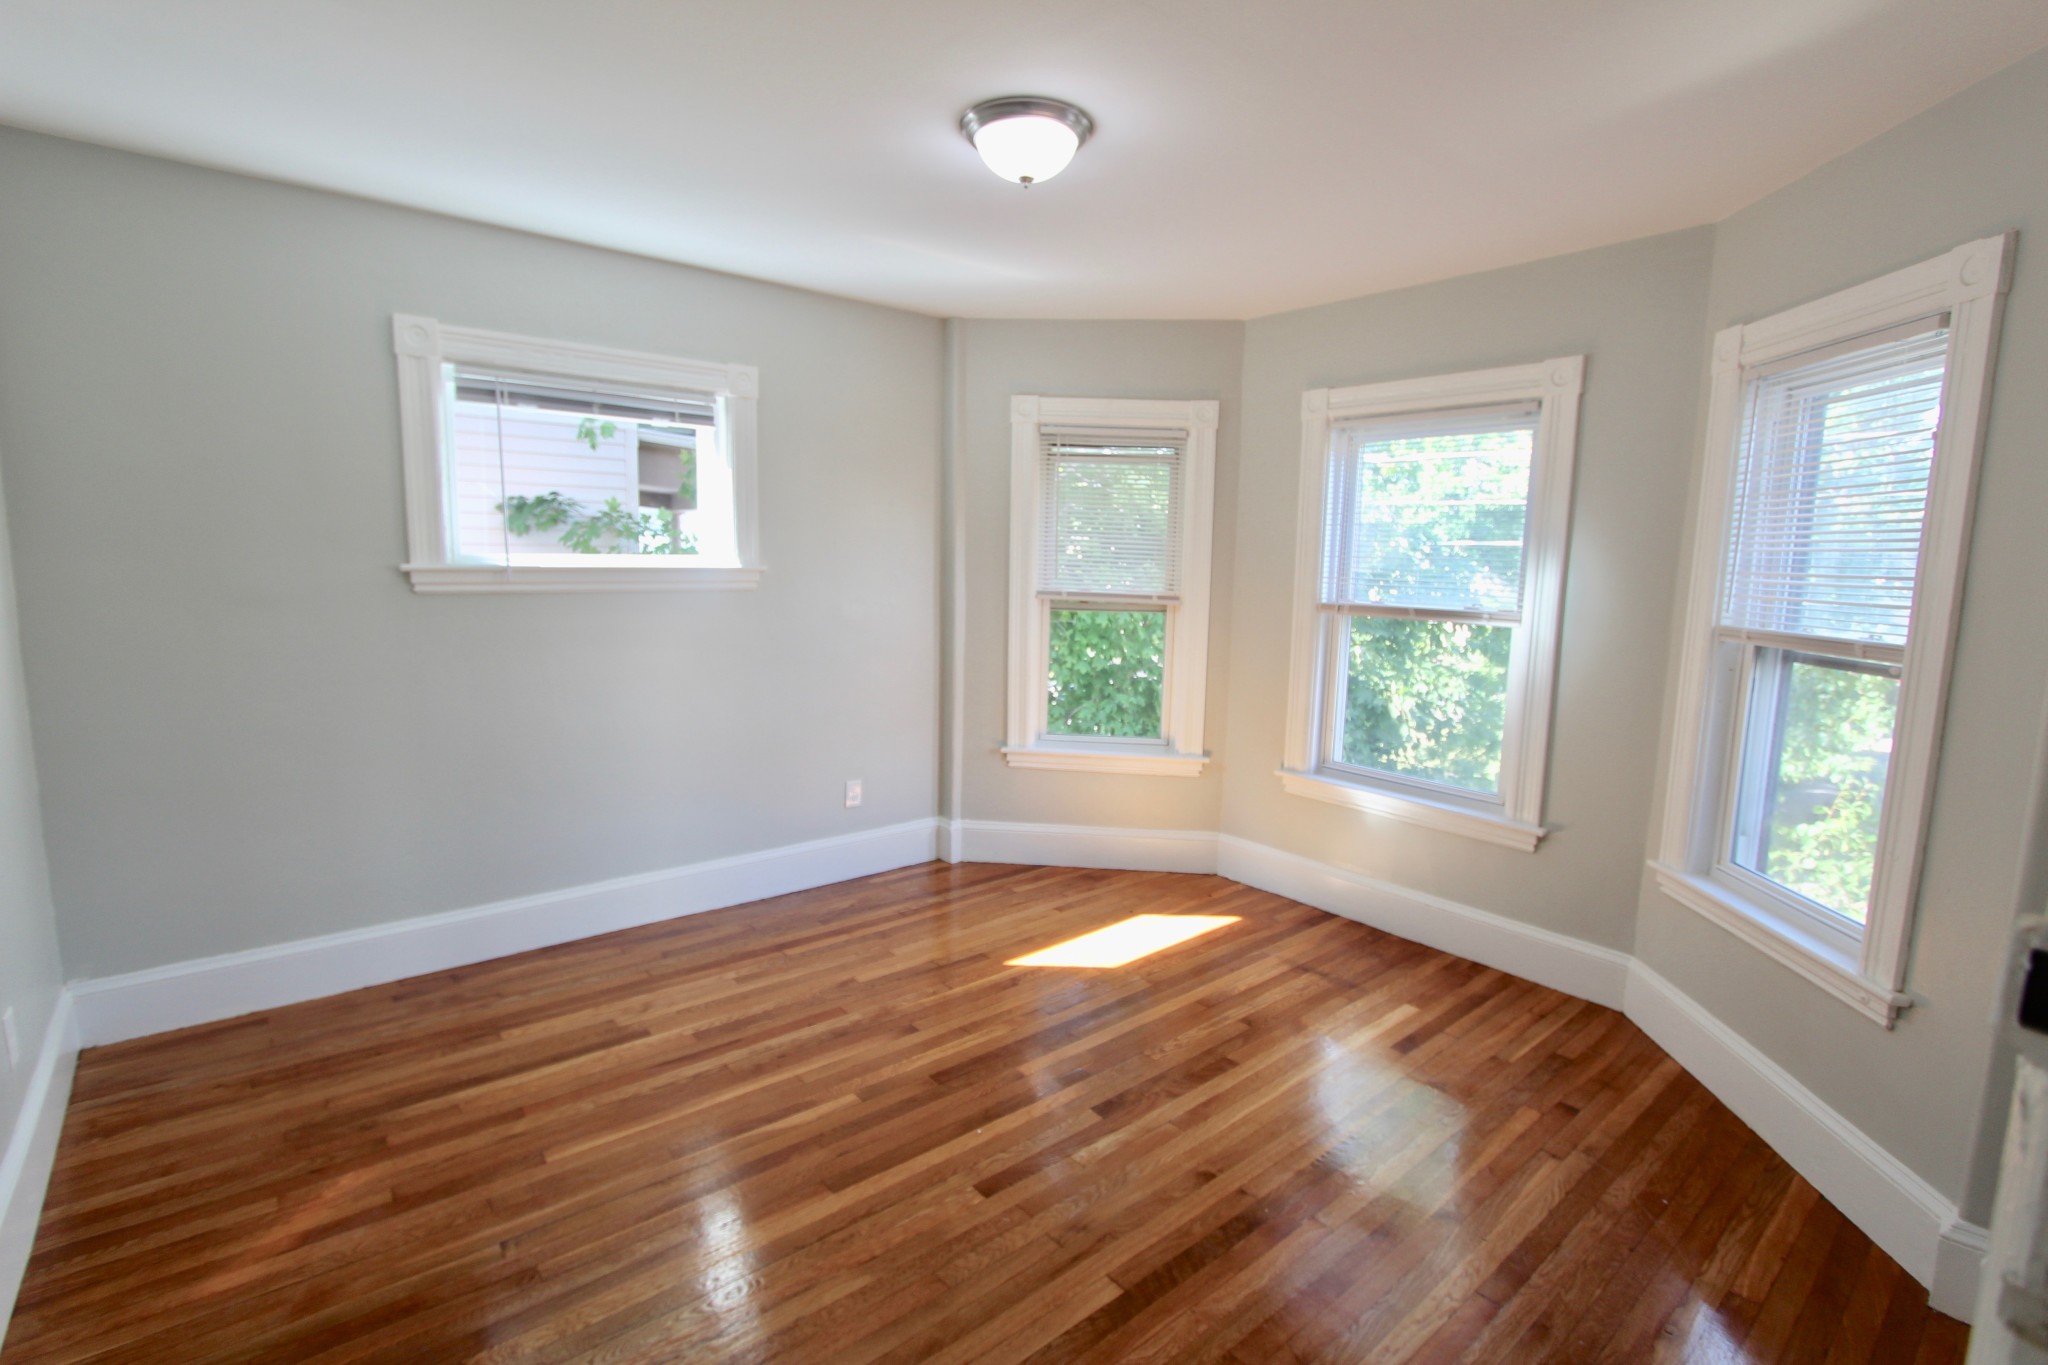 Photos of apartment on Russell st.,Malden MA 02148